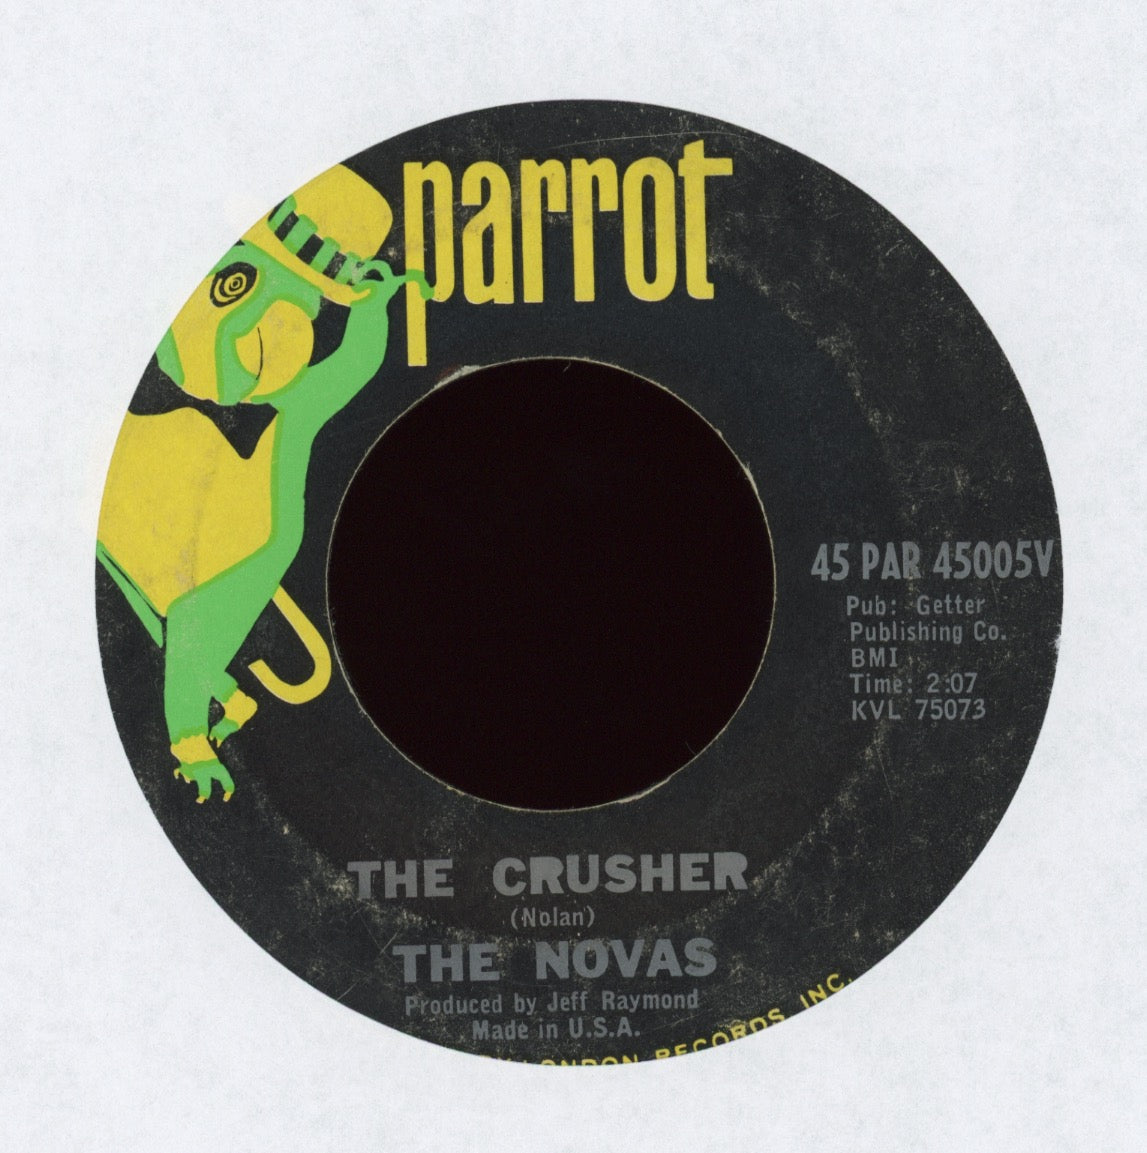 The Novas - The Crusher on Parrot